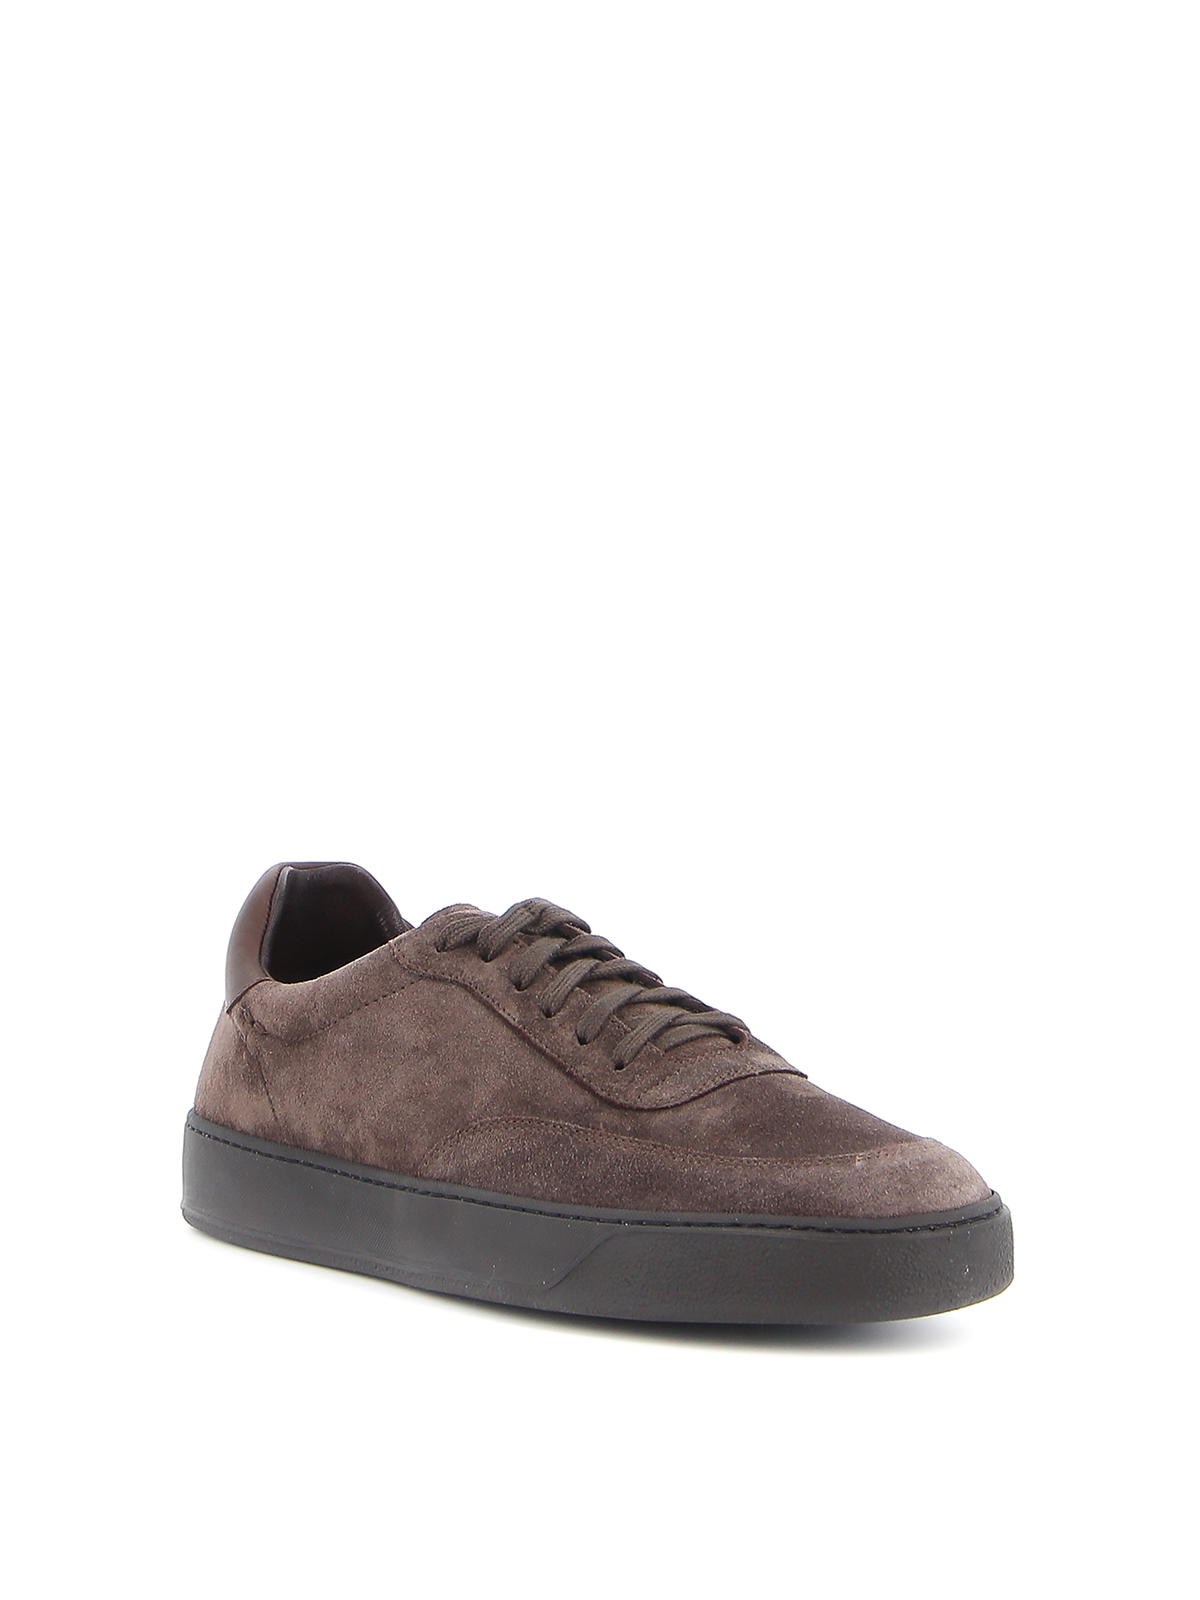 Trainers Henderson - Mitch sneakers - MITCHQUINOA | Shop online at iKRIX